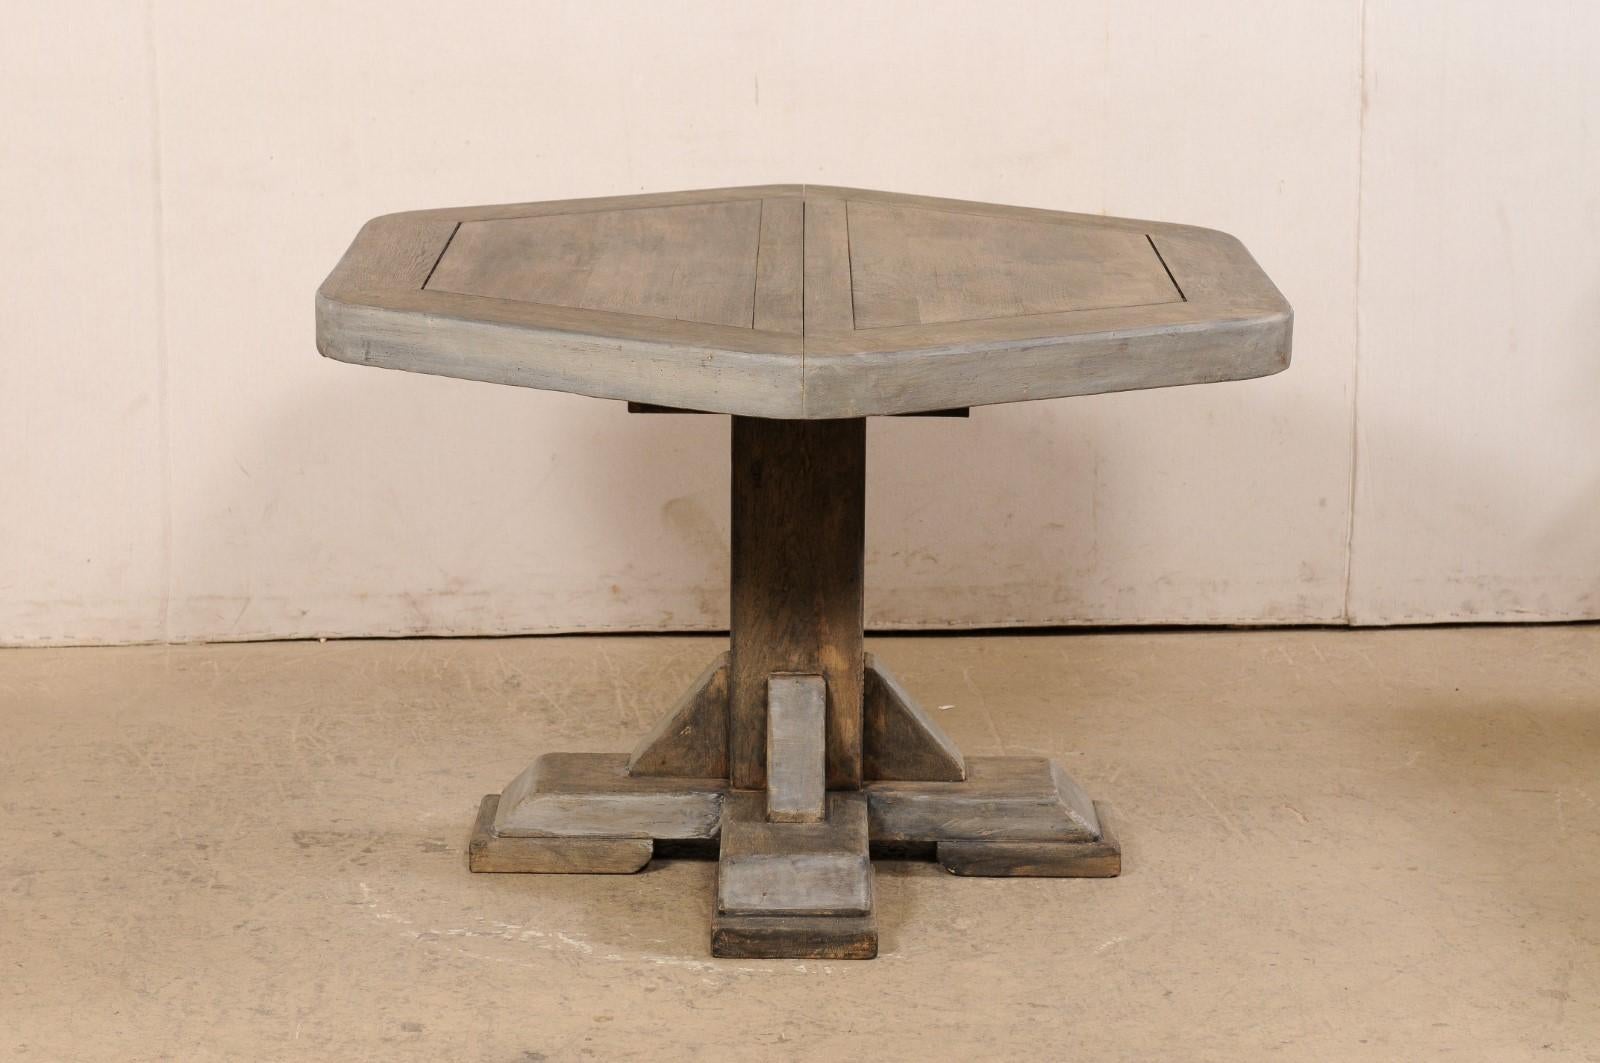 European Hexagon-Shaped Wooden Pedestal Table, Mid 20th century For Sale 5